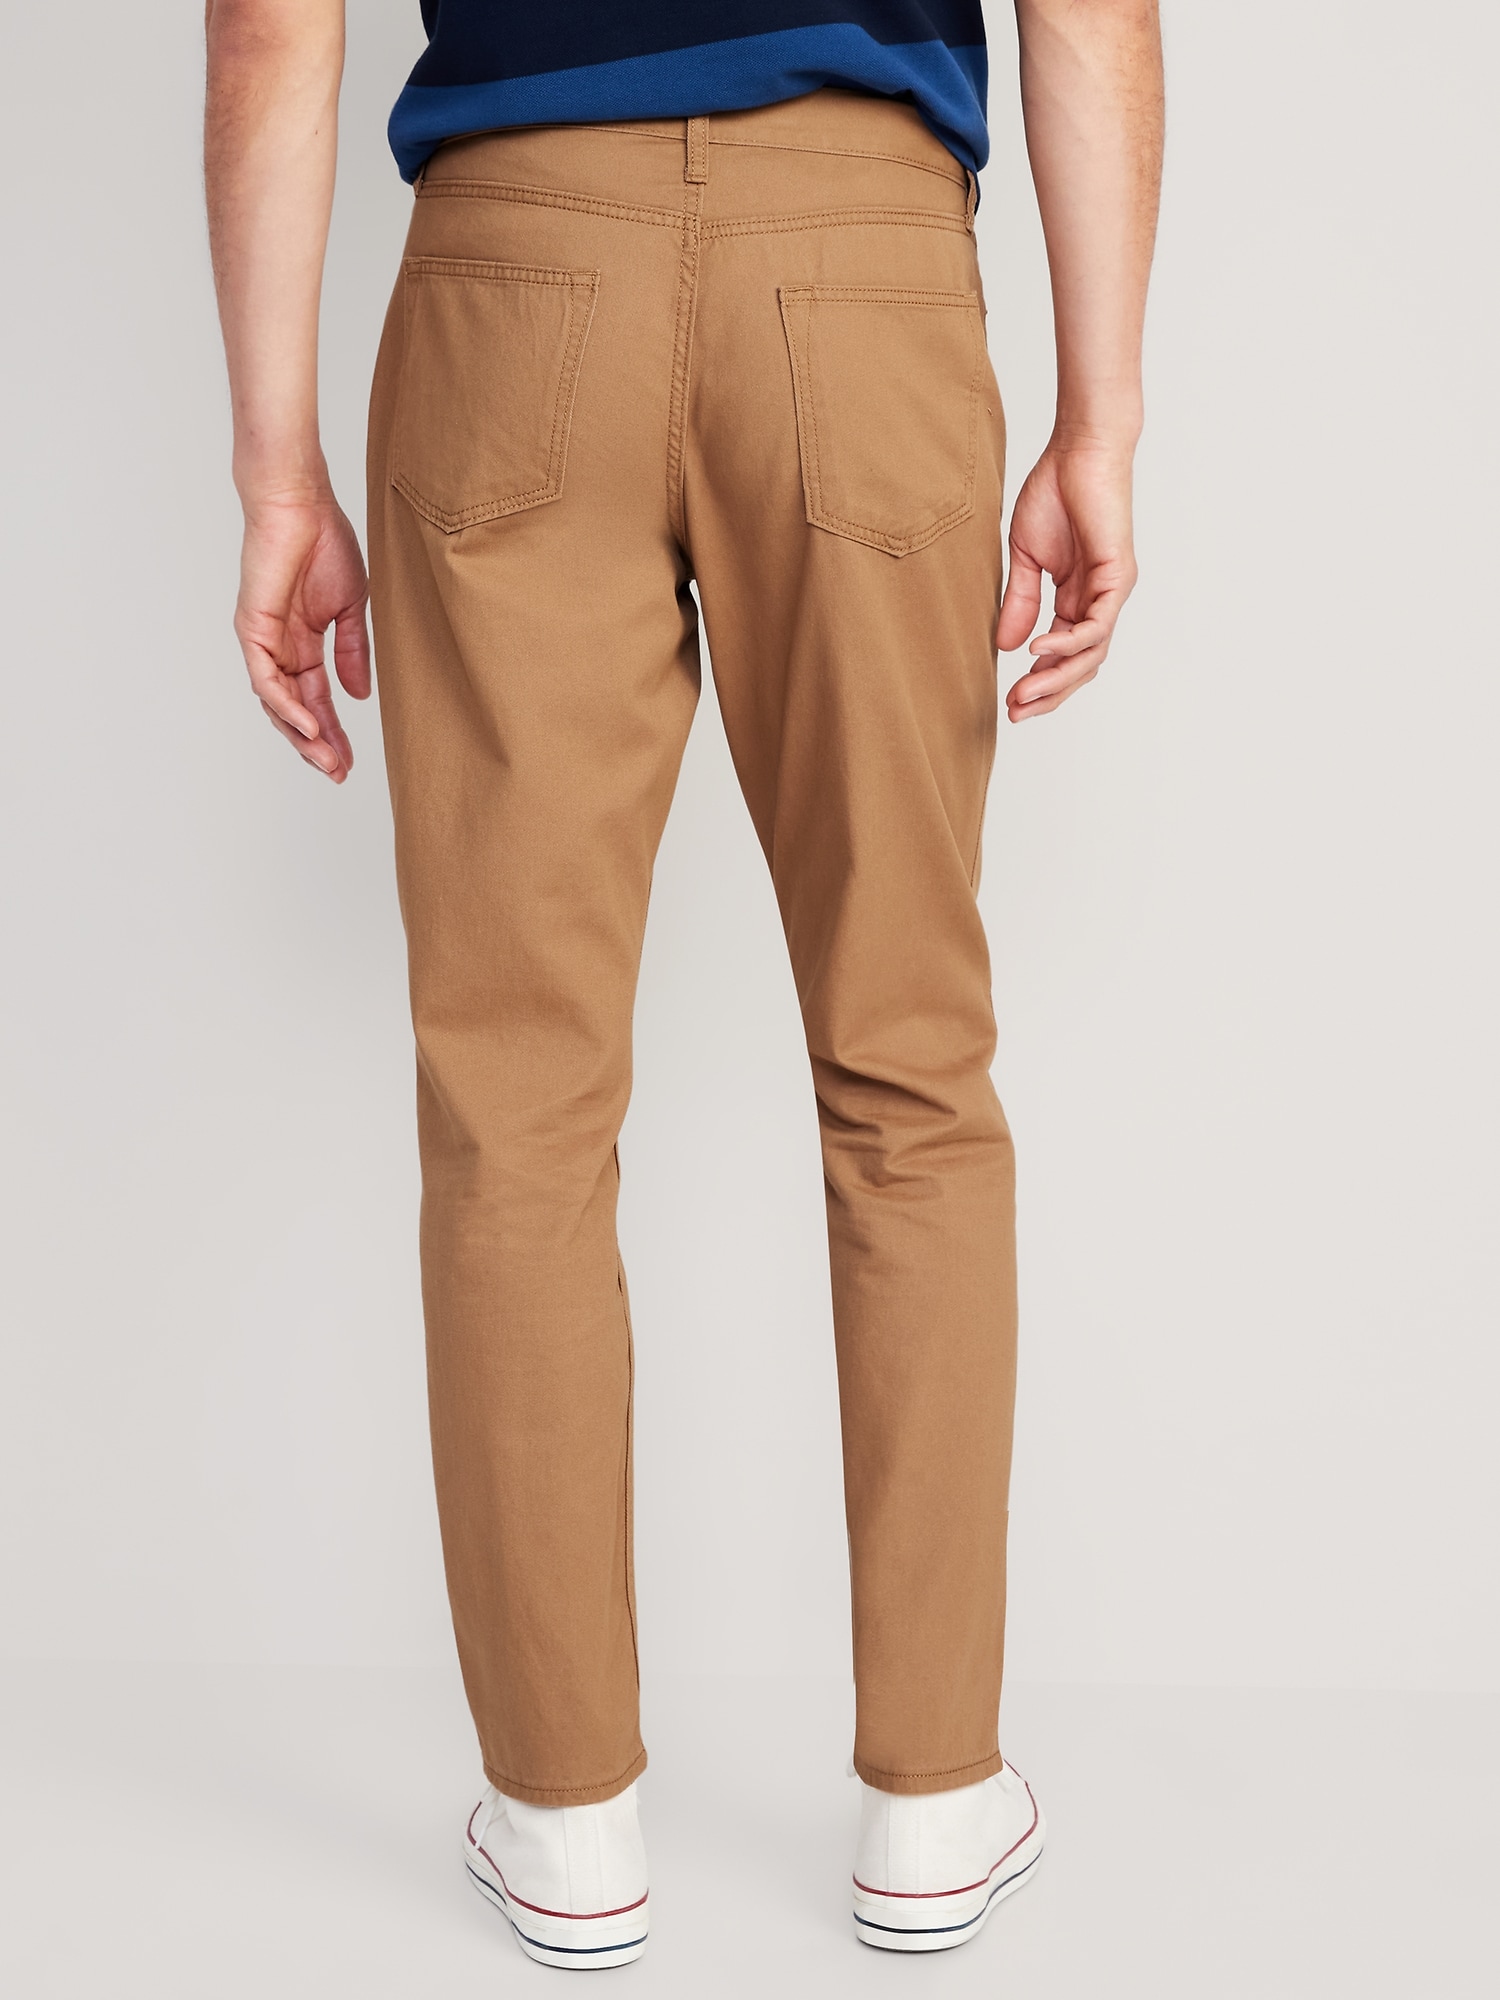 Wow Athletic Taper Non-Stretch Five-Pocket Pants for Men | Old Navy